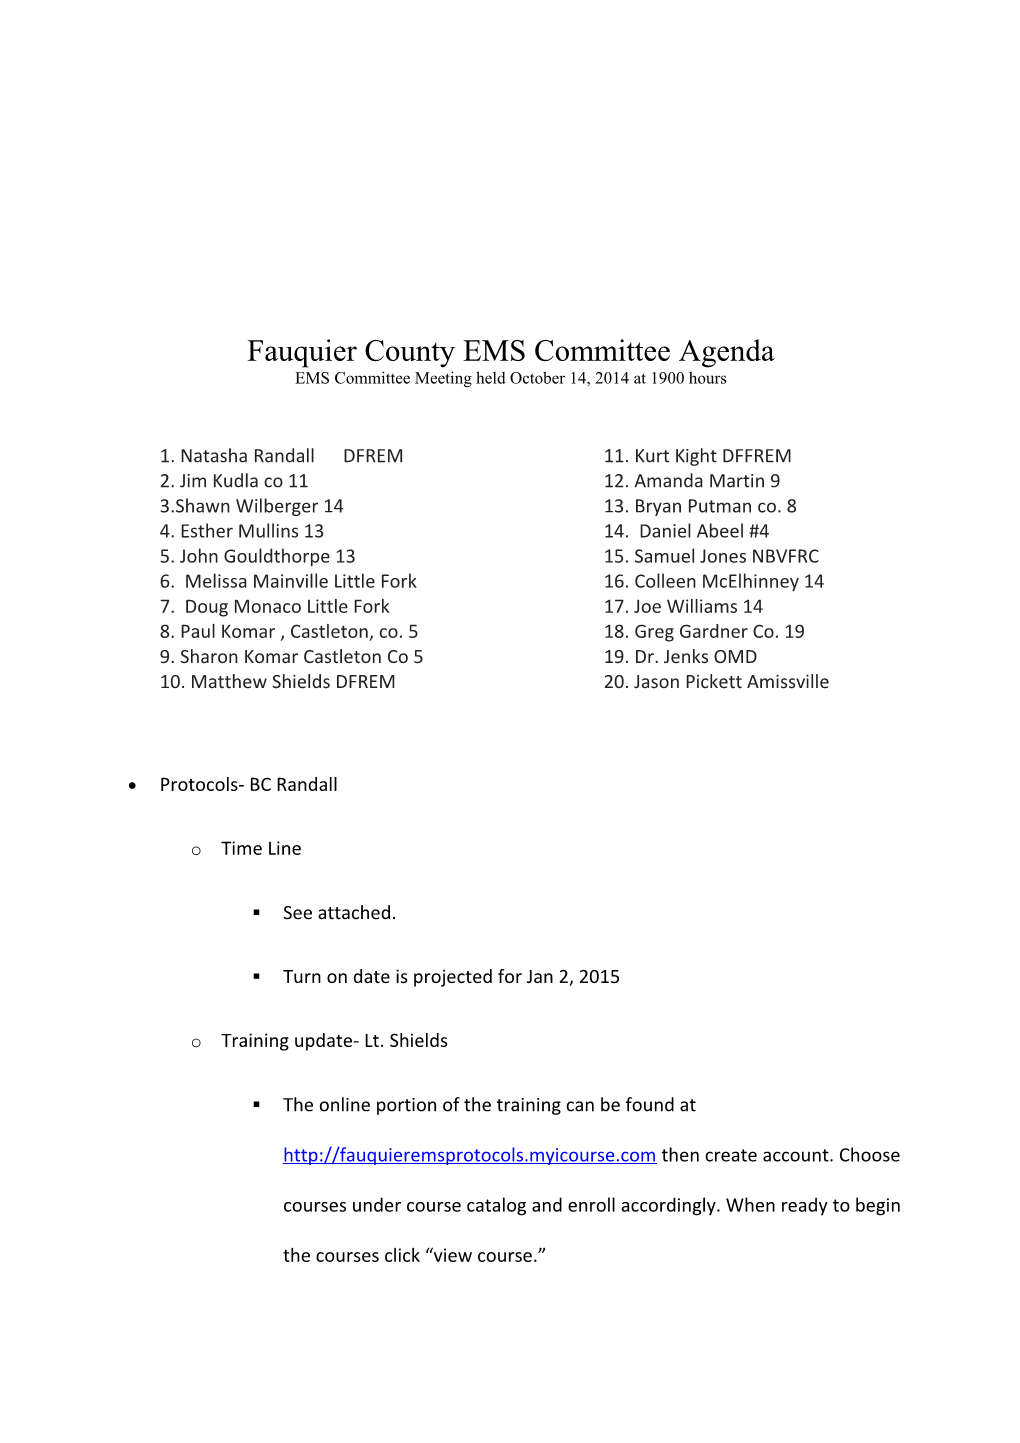 Fauquier County EMS Committee Agenda